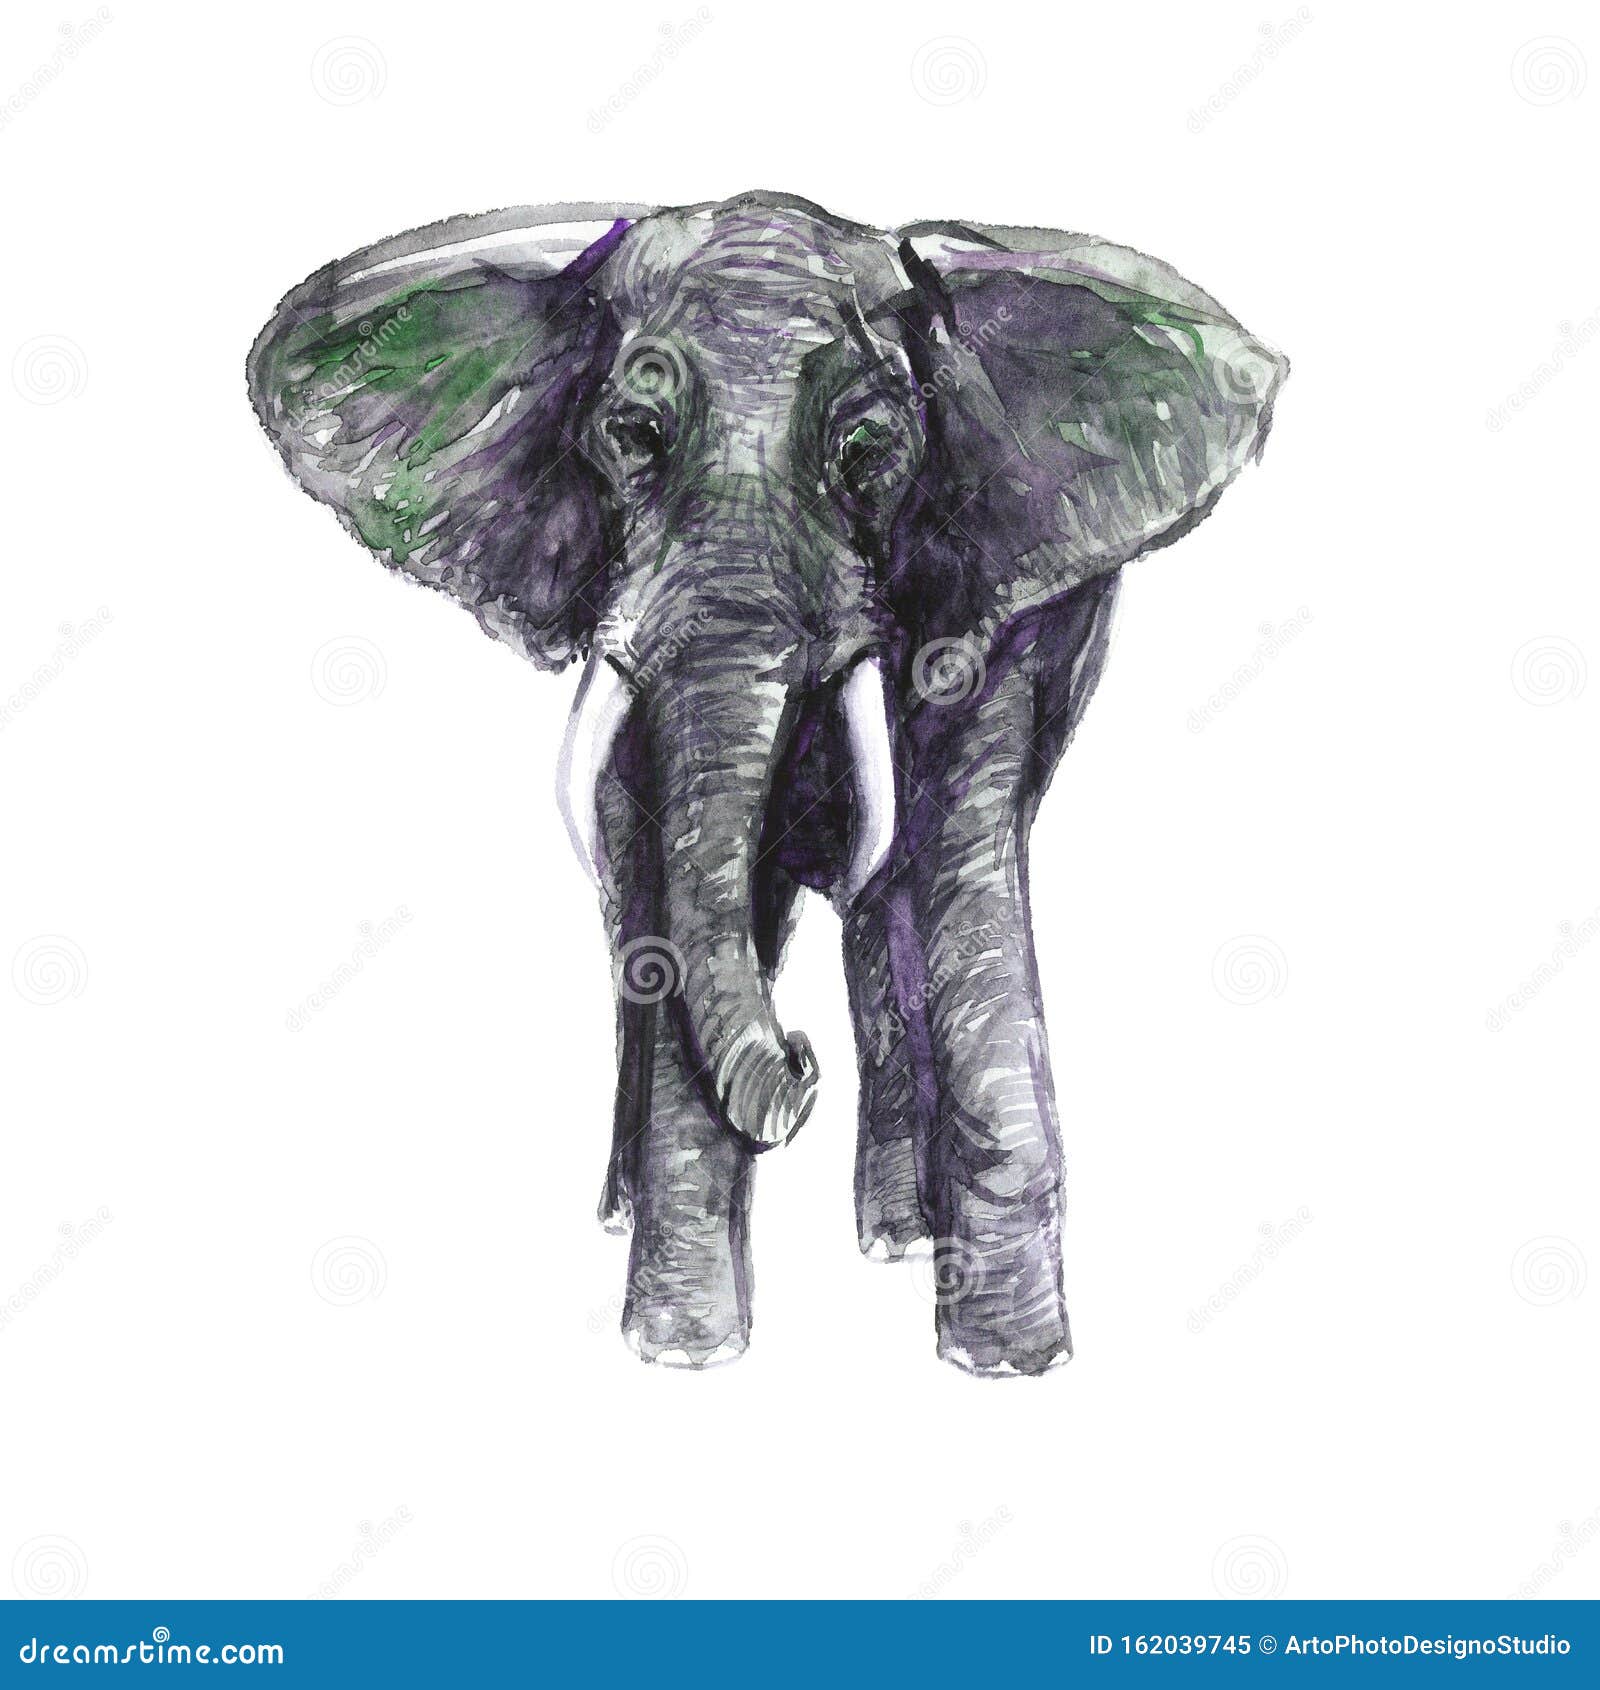 How to Draw an Elephant  Front View  YouTube